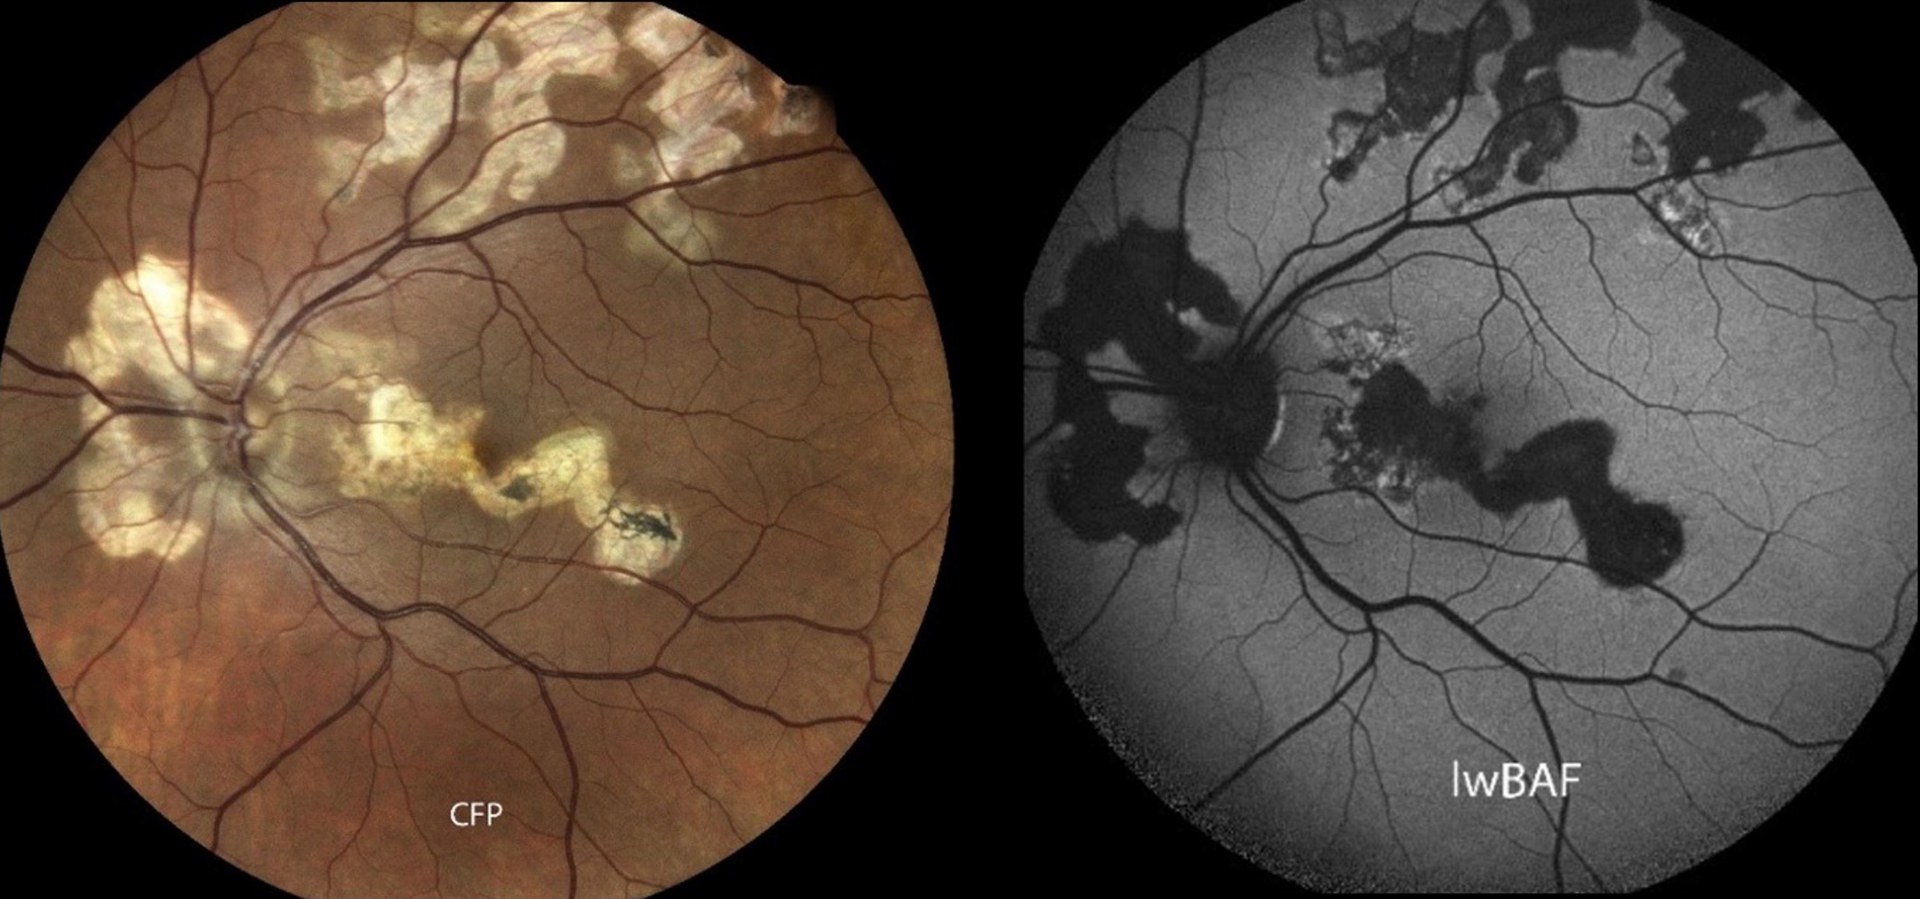 The picture shows an eye affected by the rare serpiginous chorioretinopathy.